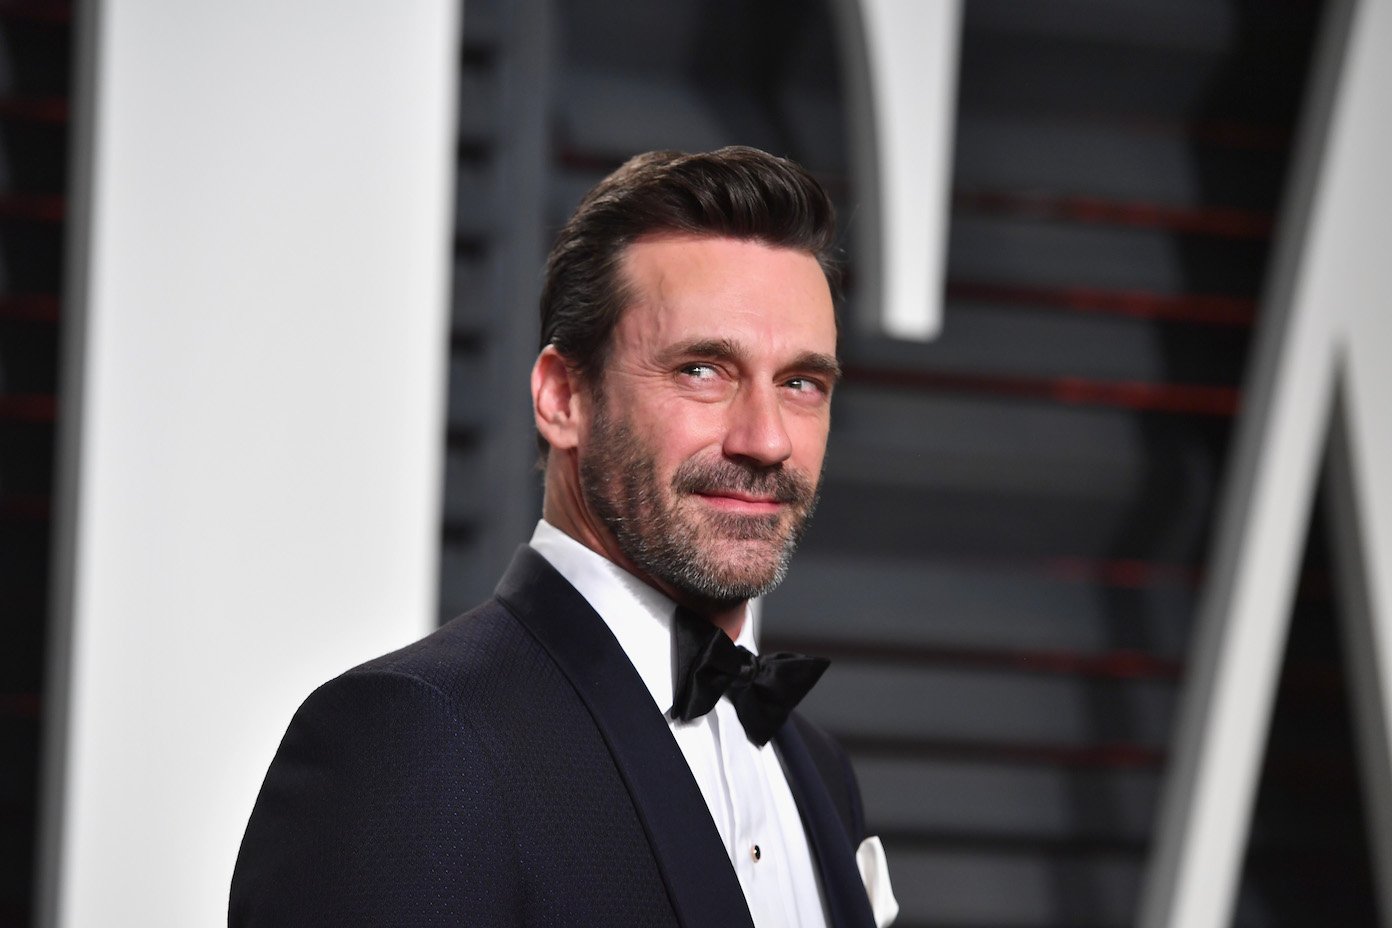 Actor Jon Hamm attends the 2017 Vanity Fair Oscar Party hosted by Graydon Carter at Wallis Annenberg Center for the Performing Arts on February 26, 2017 in Beverly Hills, California. 